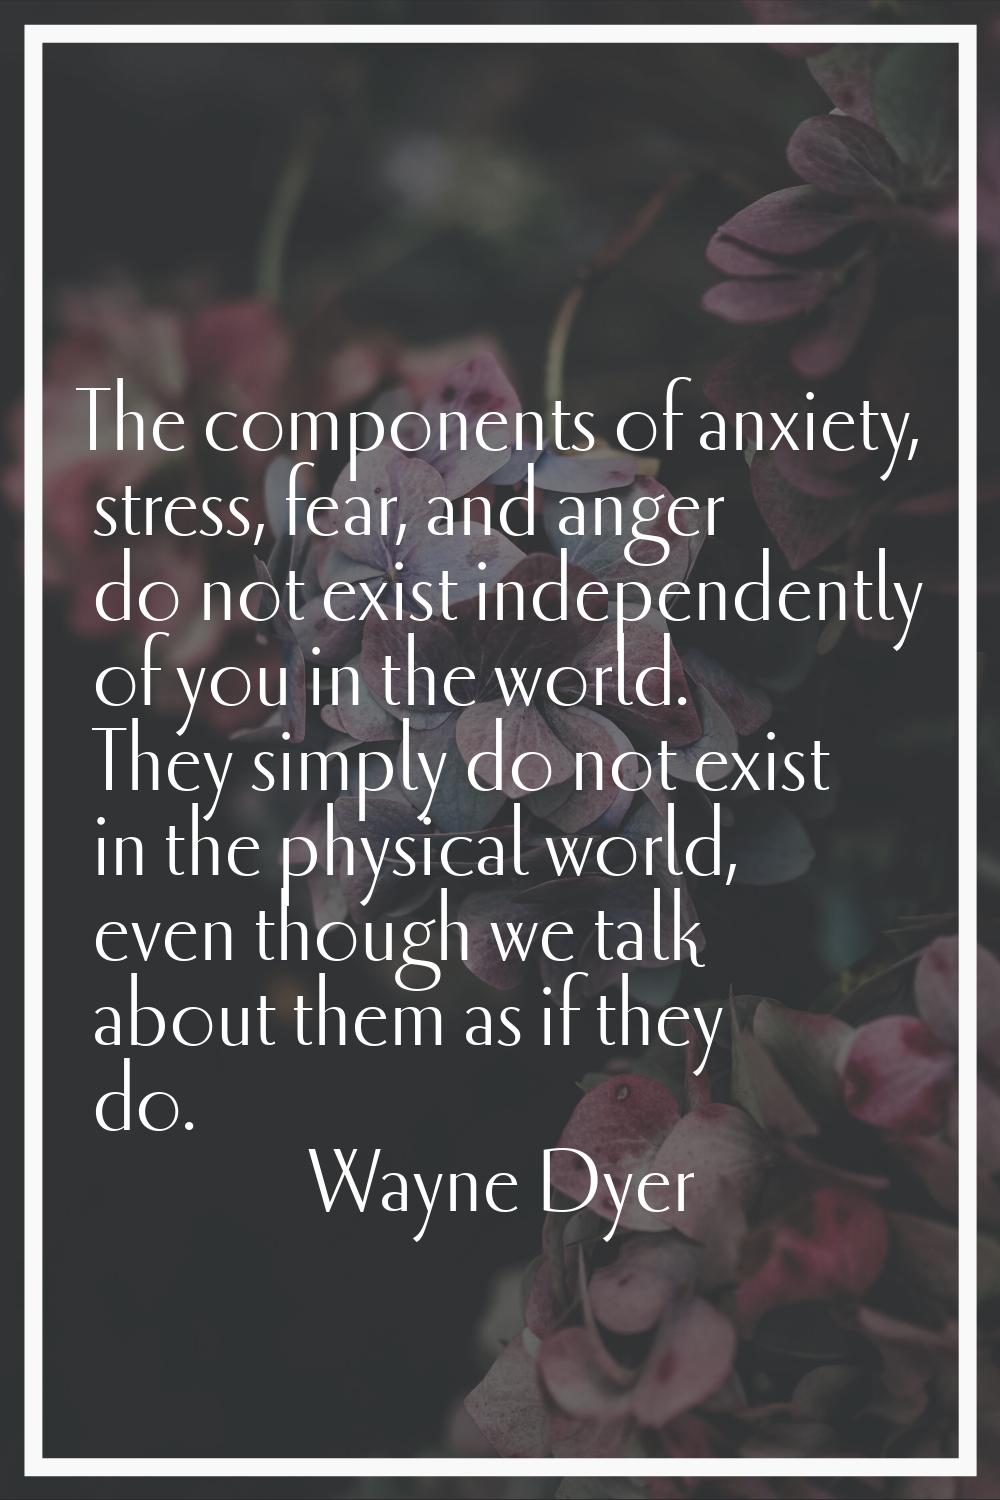 The components of anxiety, stress, fear, and anger do not exist independently of you in the world. 